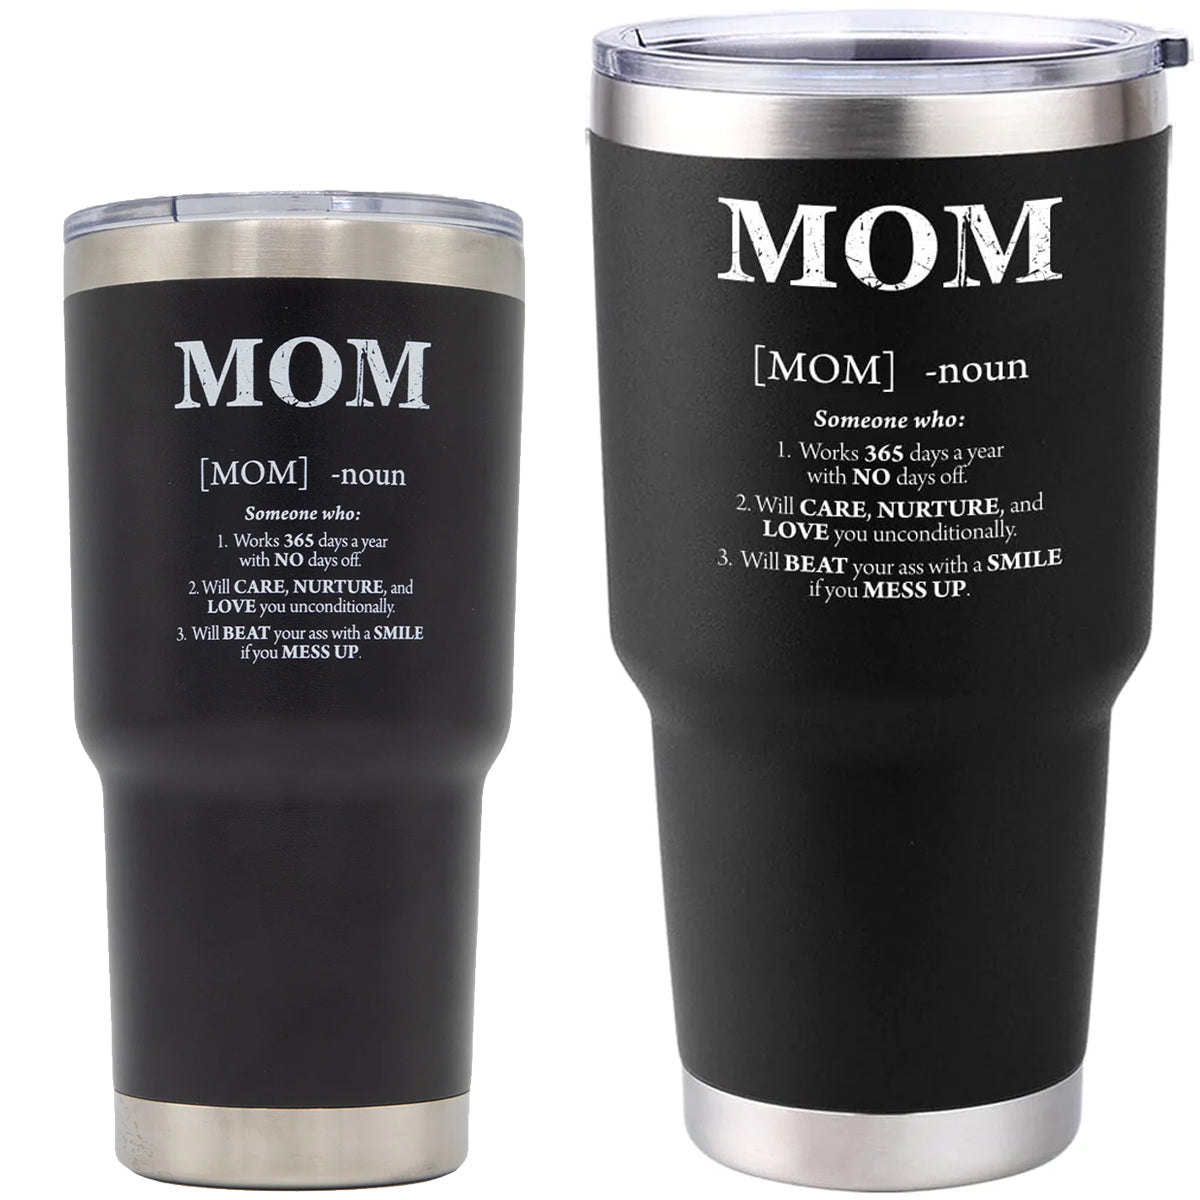 Grunt Style Mom Defined Vacuum Insulated Stainless Steel Tumbler - Black Grunt Style